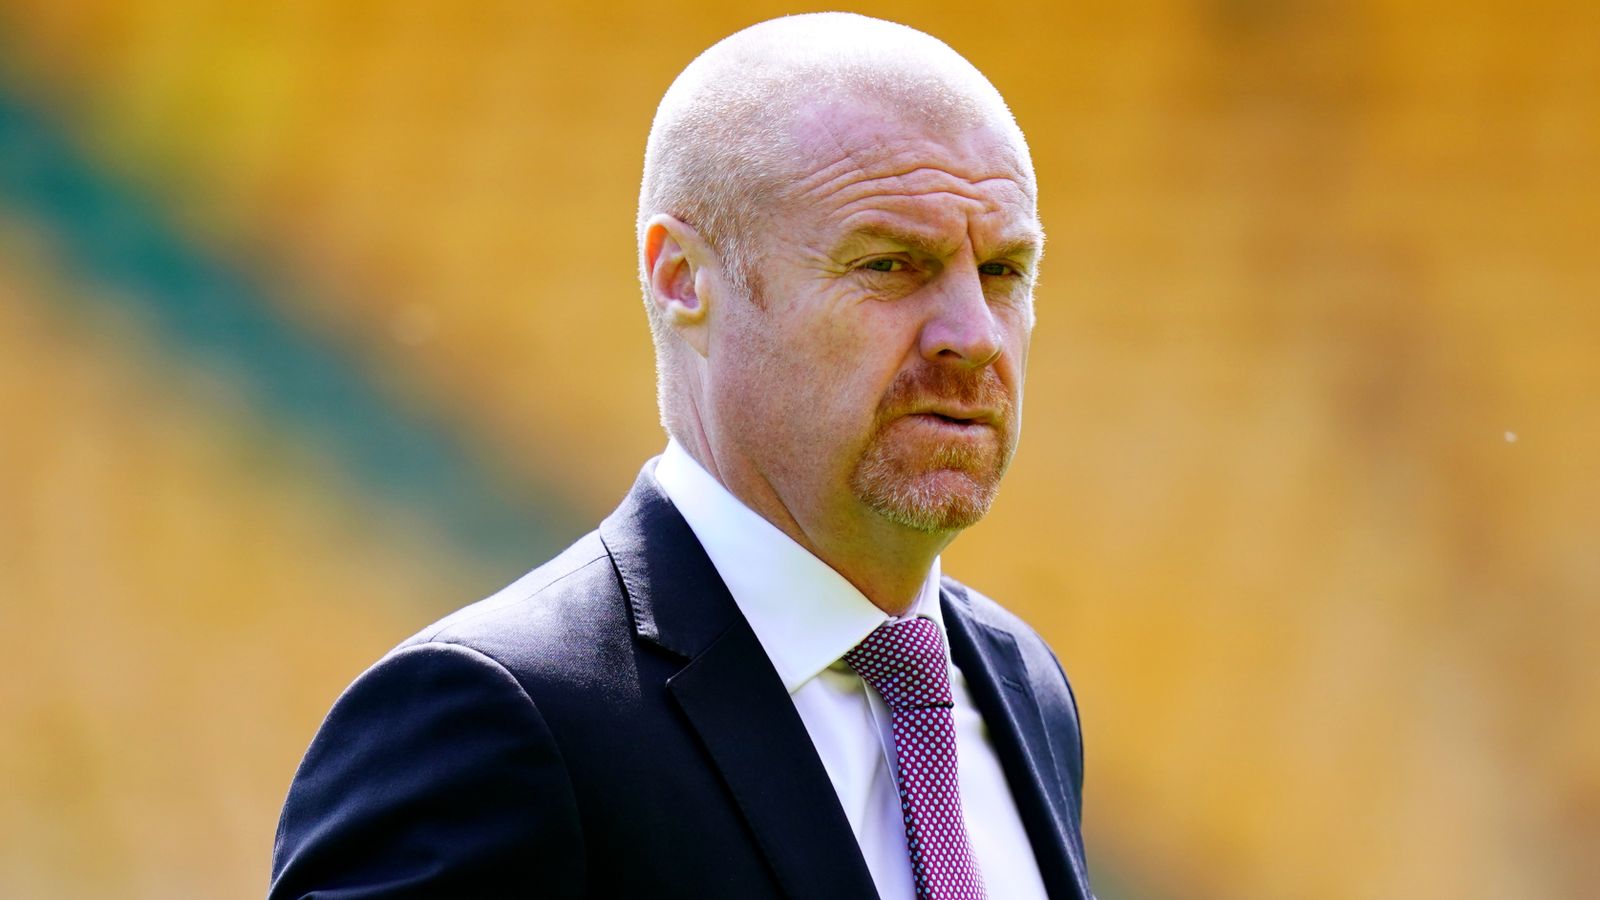 Sean Dyche talks about Everton's "horrid" night and claims Chelsea still have one area to improve despite Everton drubbing.